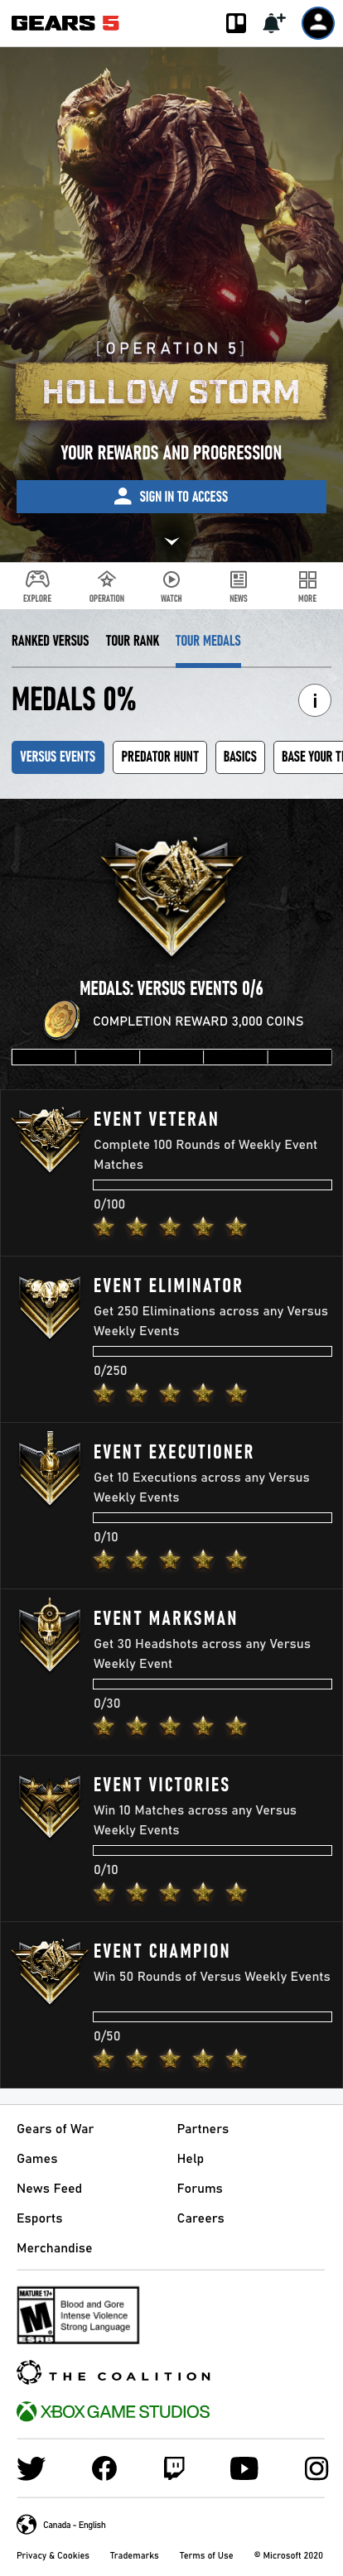 Operation 5 Tour Medals on mobile